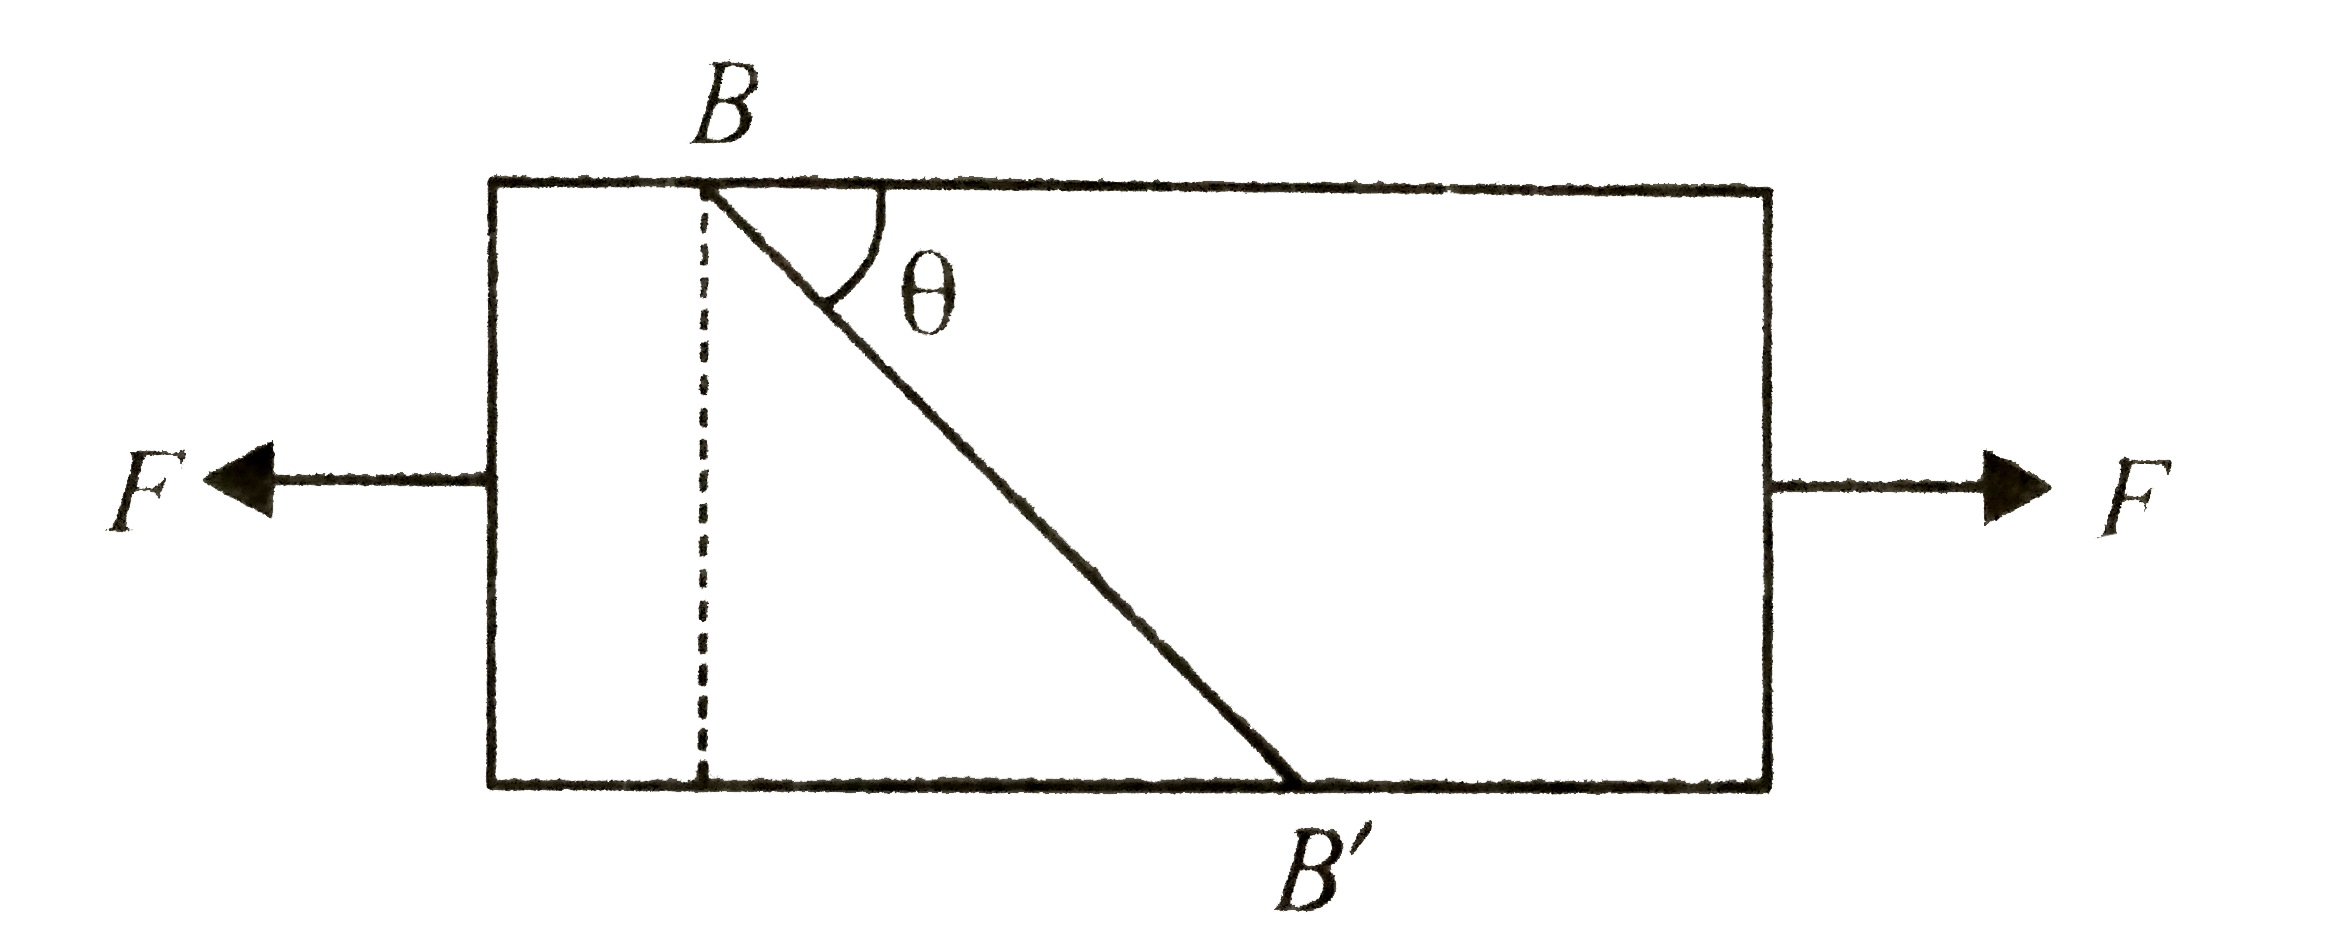 A bar of cross- sectional area A is is subjected two equal and opposite tensile forces at its ends as shown in figure.  Consider a plane BB' making an angle theta with length. The ratio of tensile stress to the shearing stress on the plane BB' is